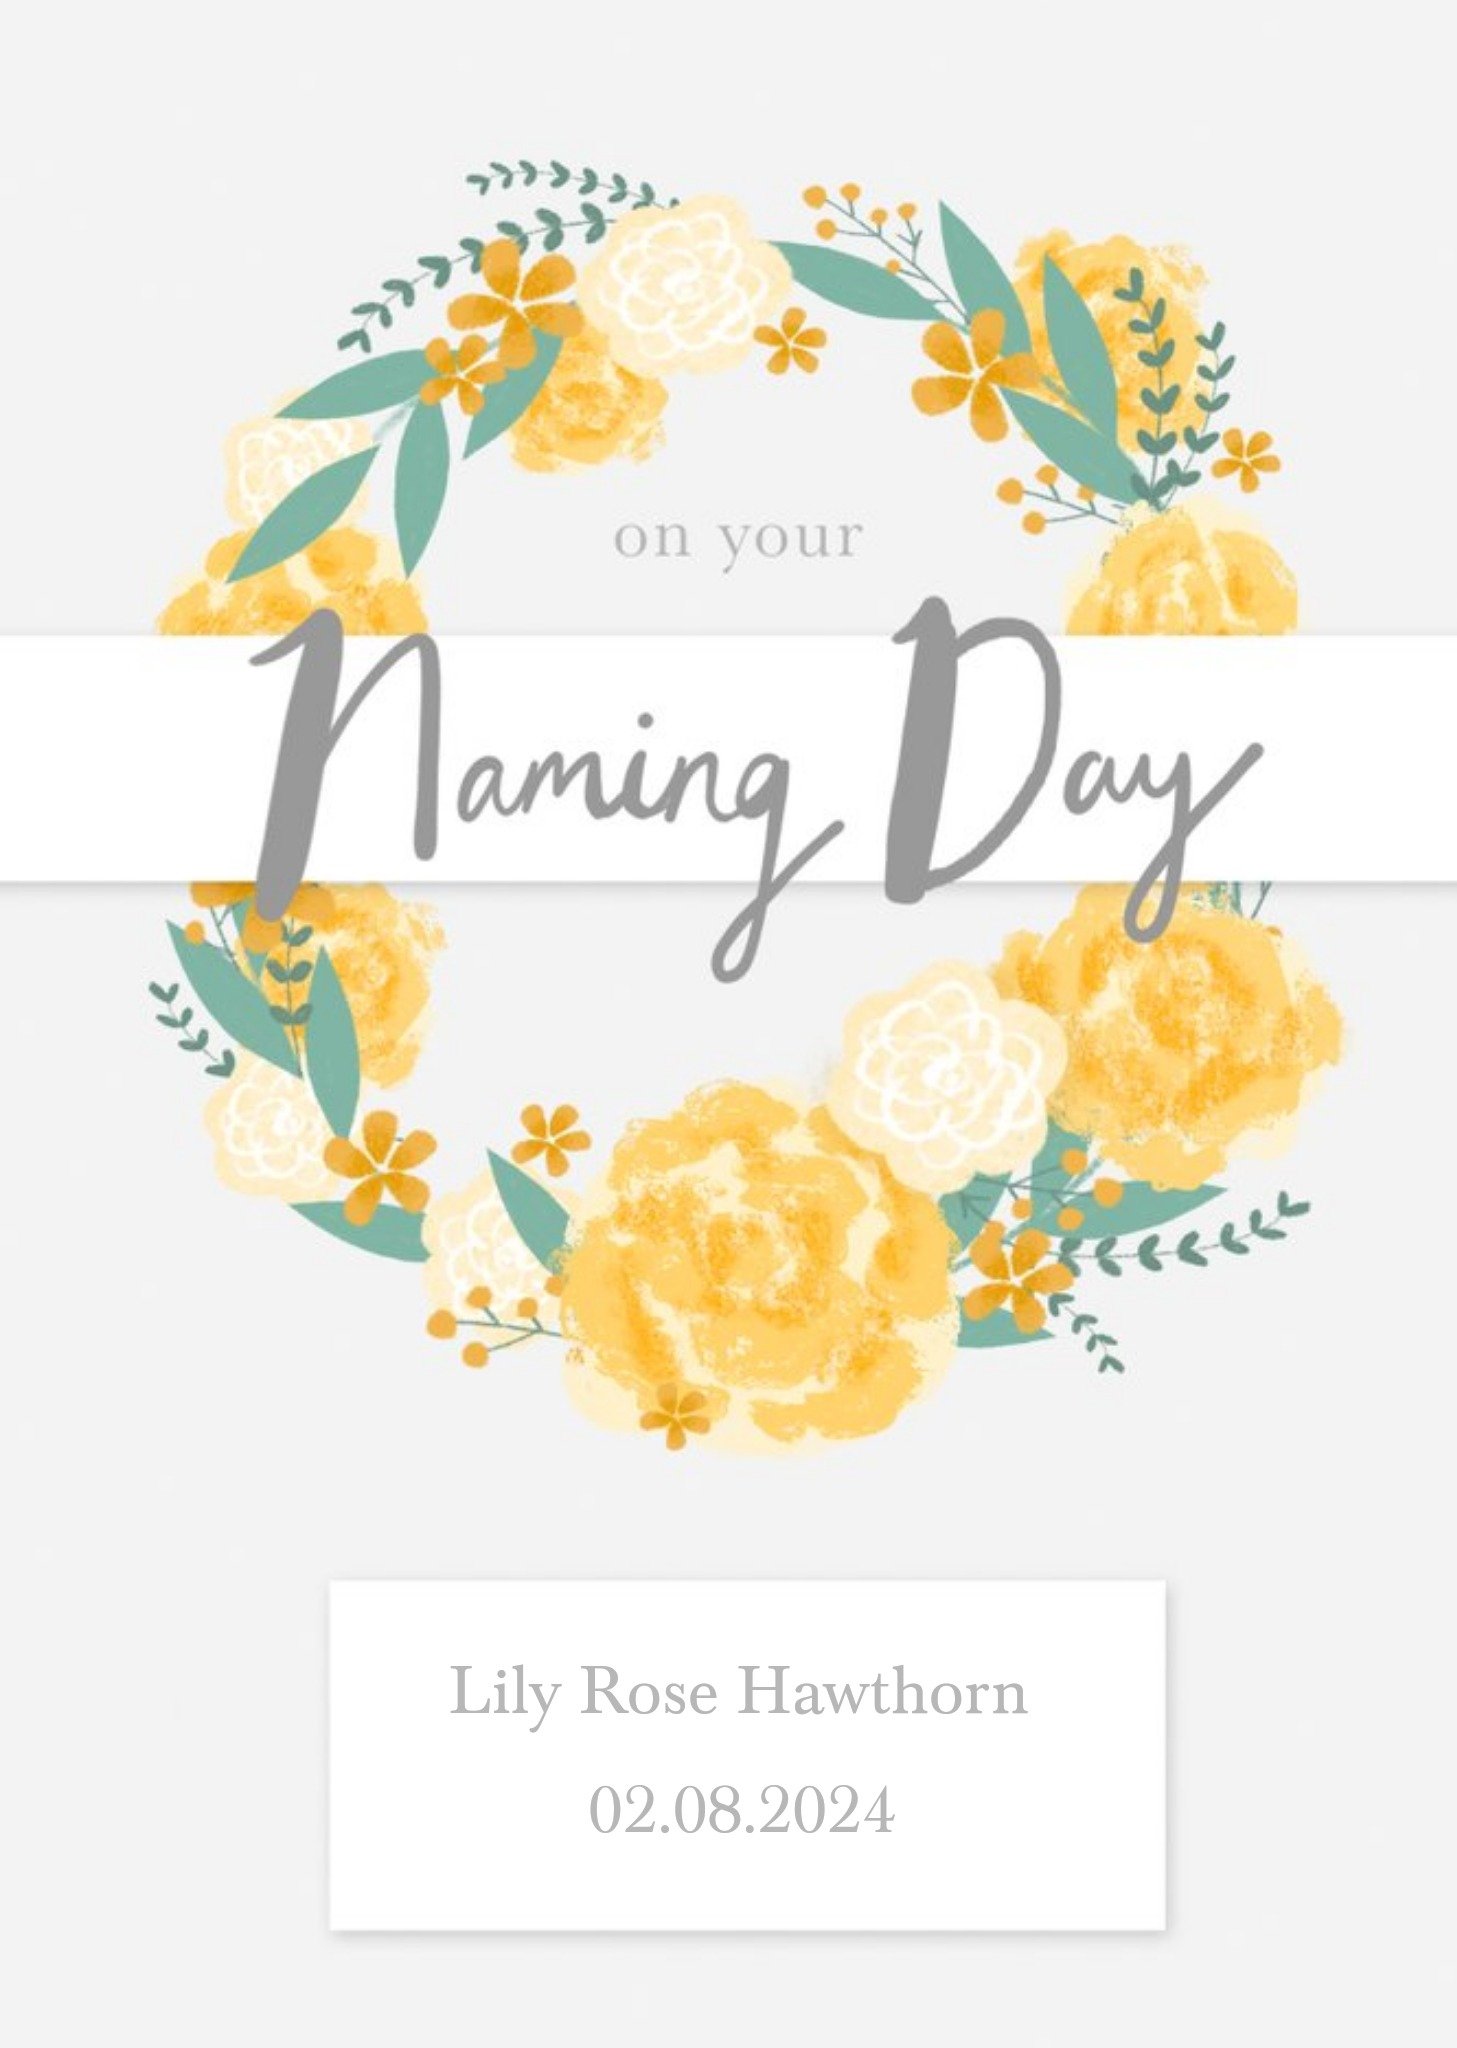 Moonpig Millicent Venton Yellow Floral Wreath Naming Day Card Ecard